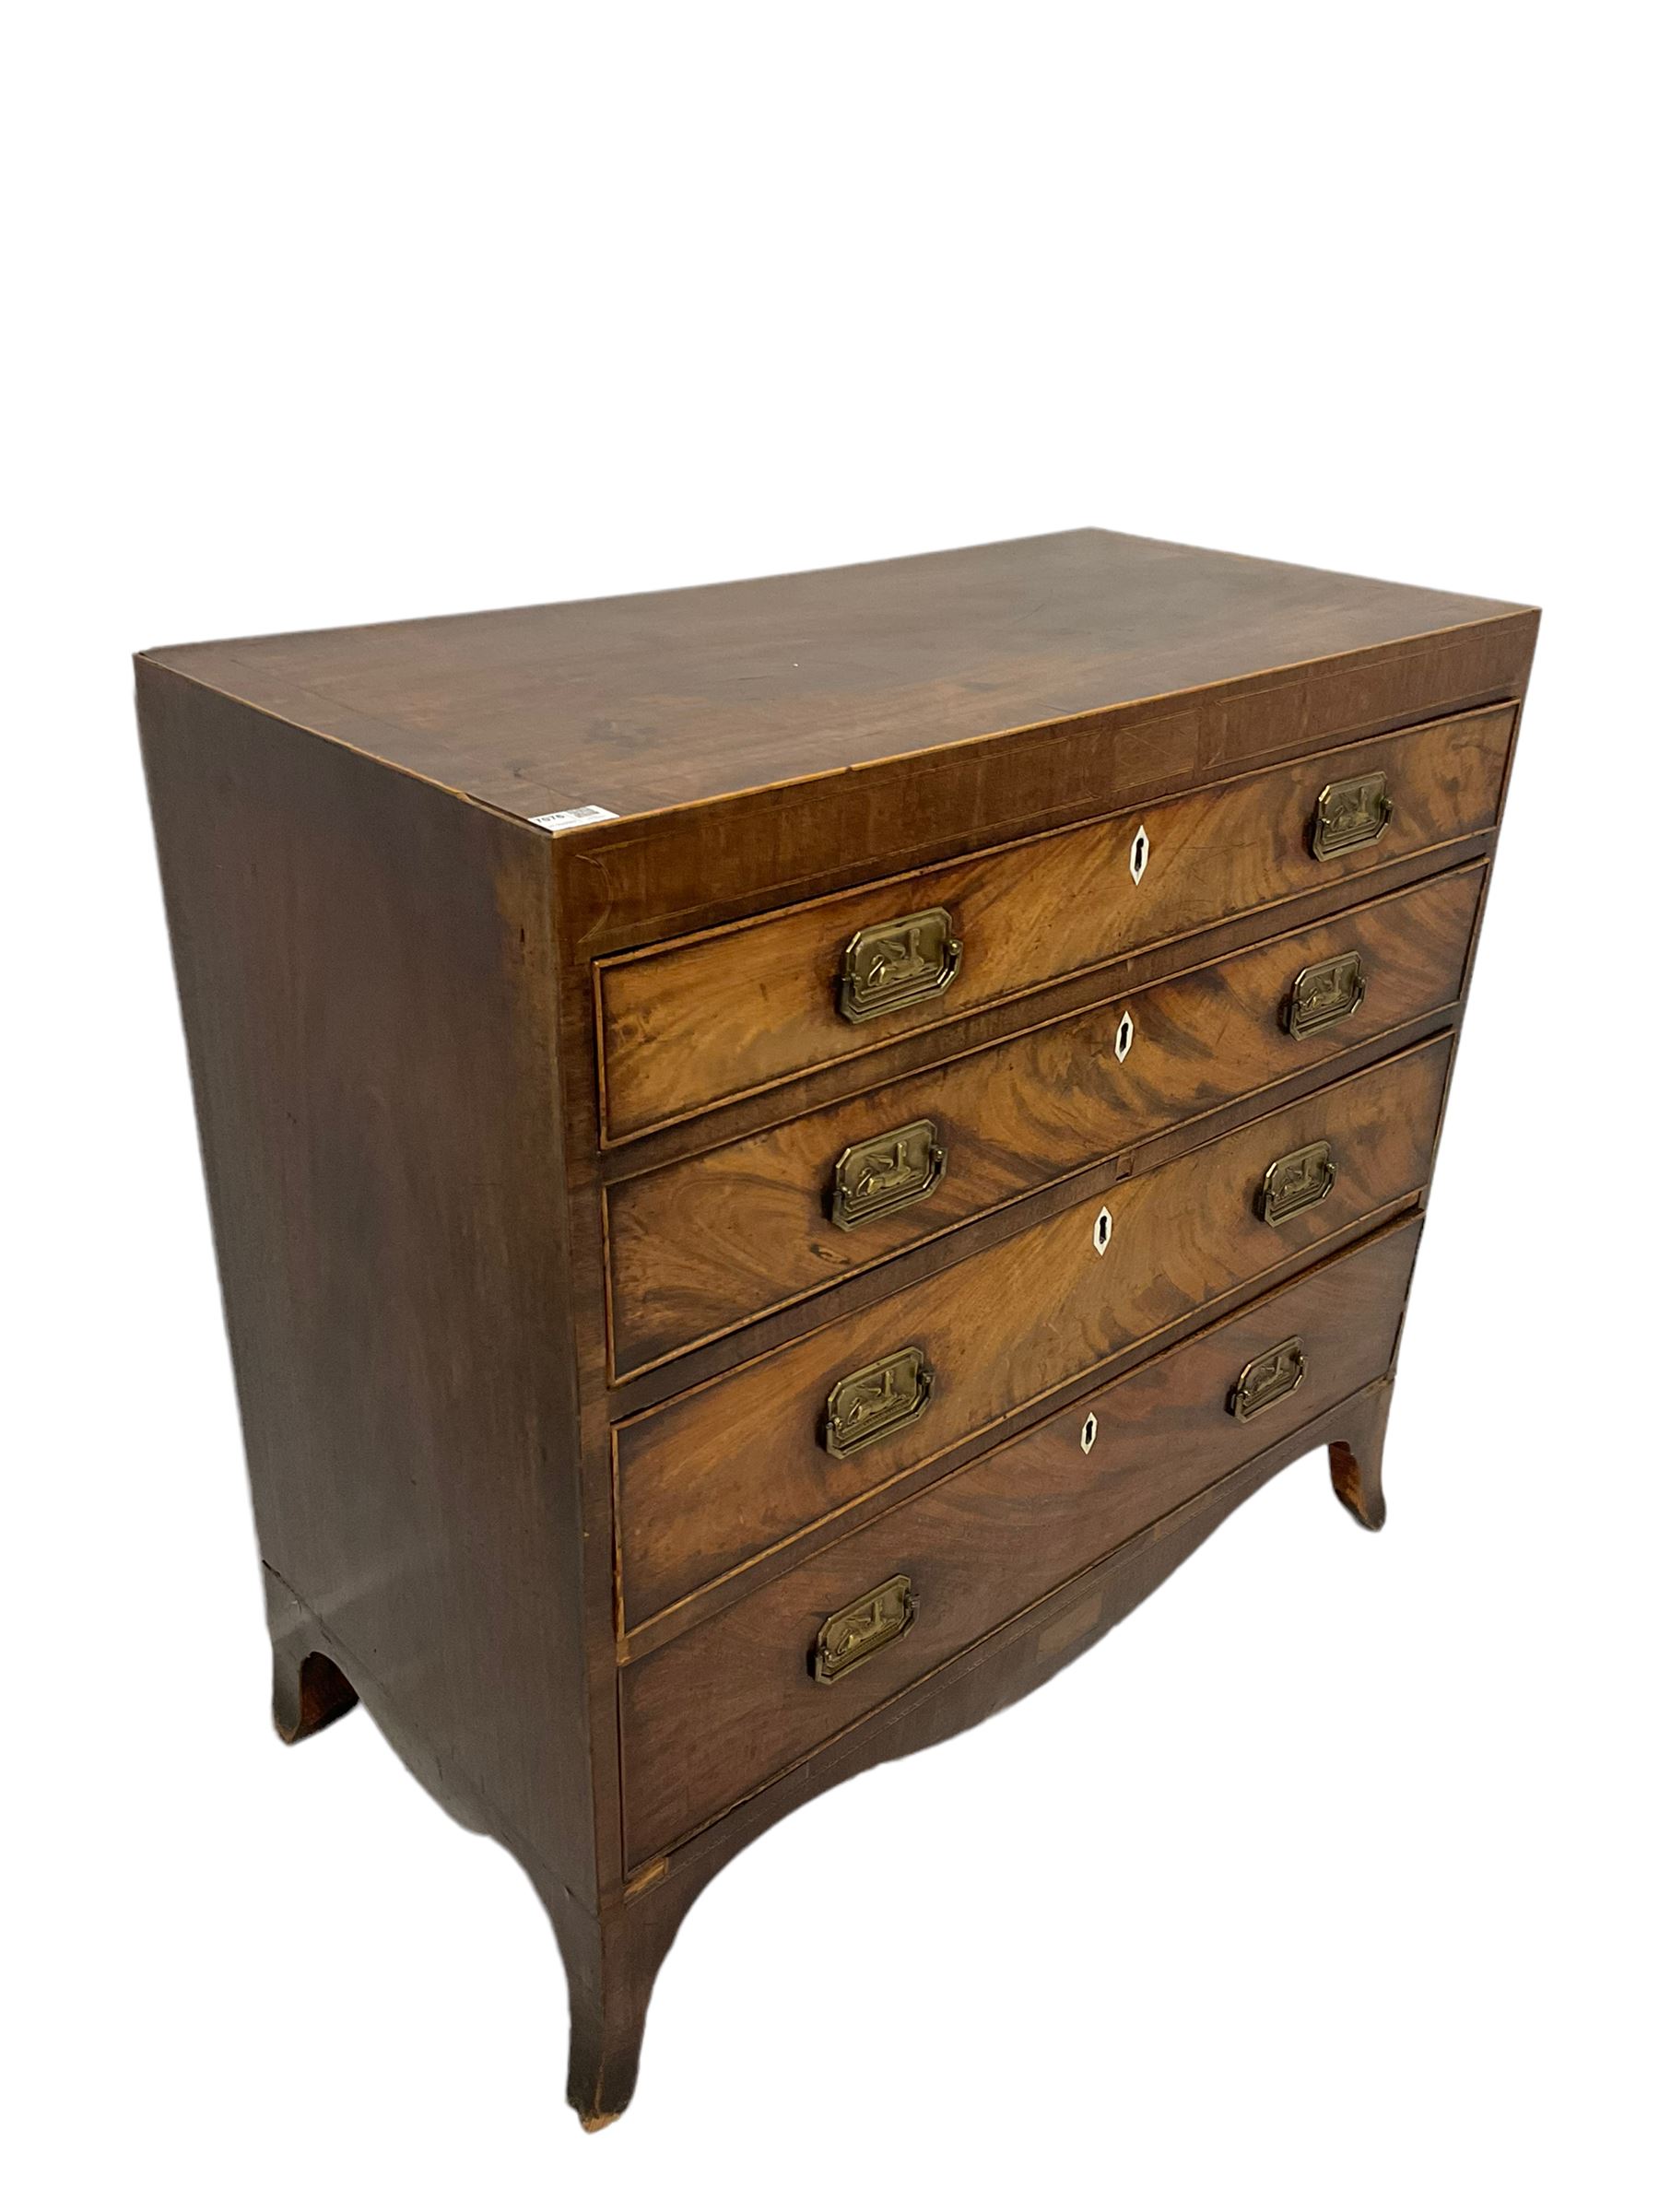 Early 19th century mahogany chest of drawers - Image 2 of 5